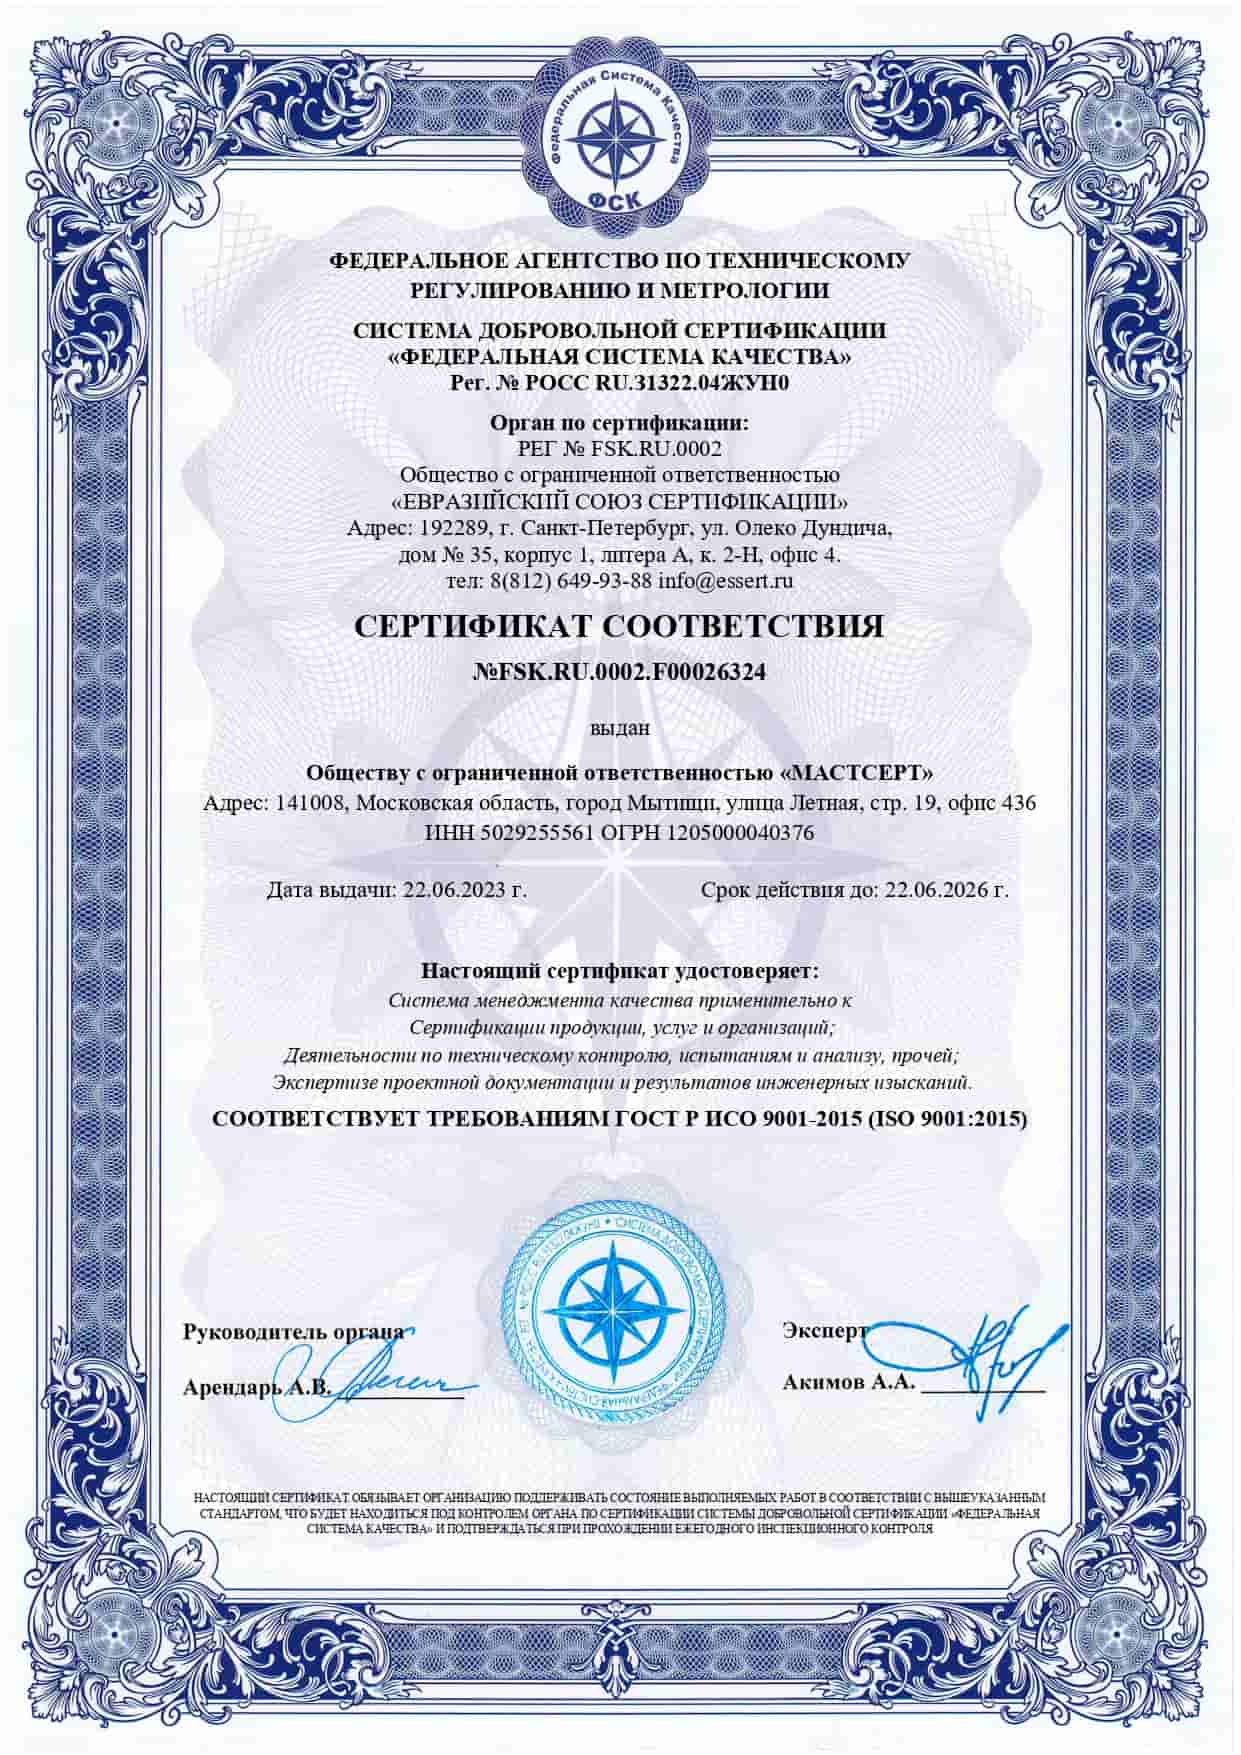 Certificate of conformity ISO 9001 for 